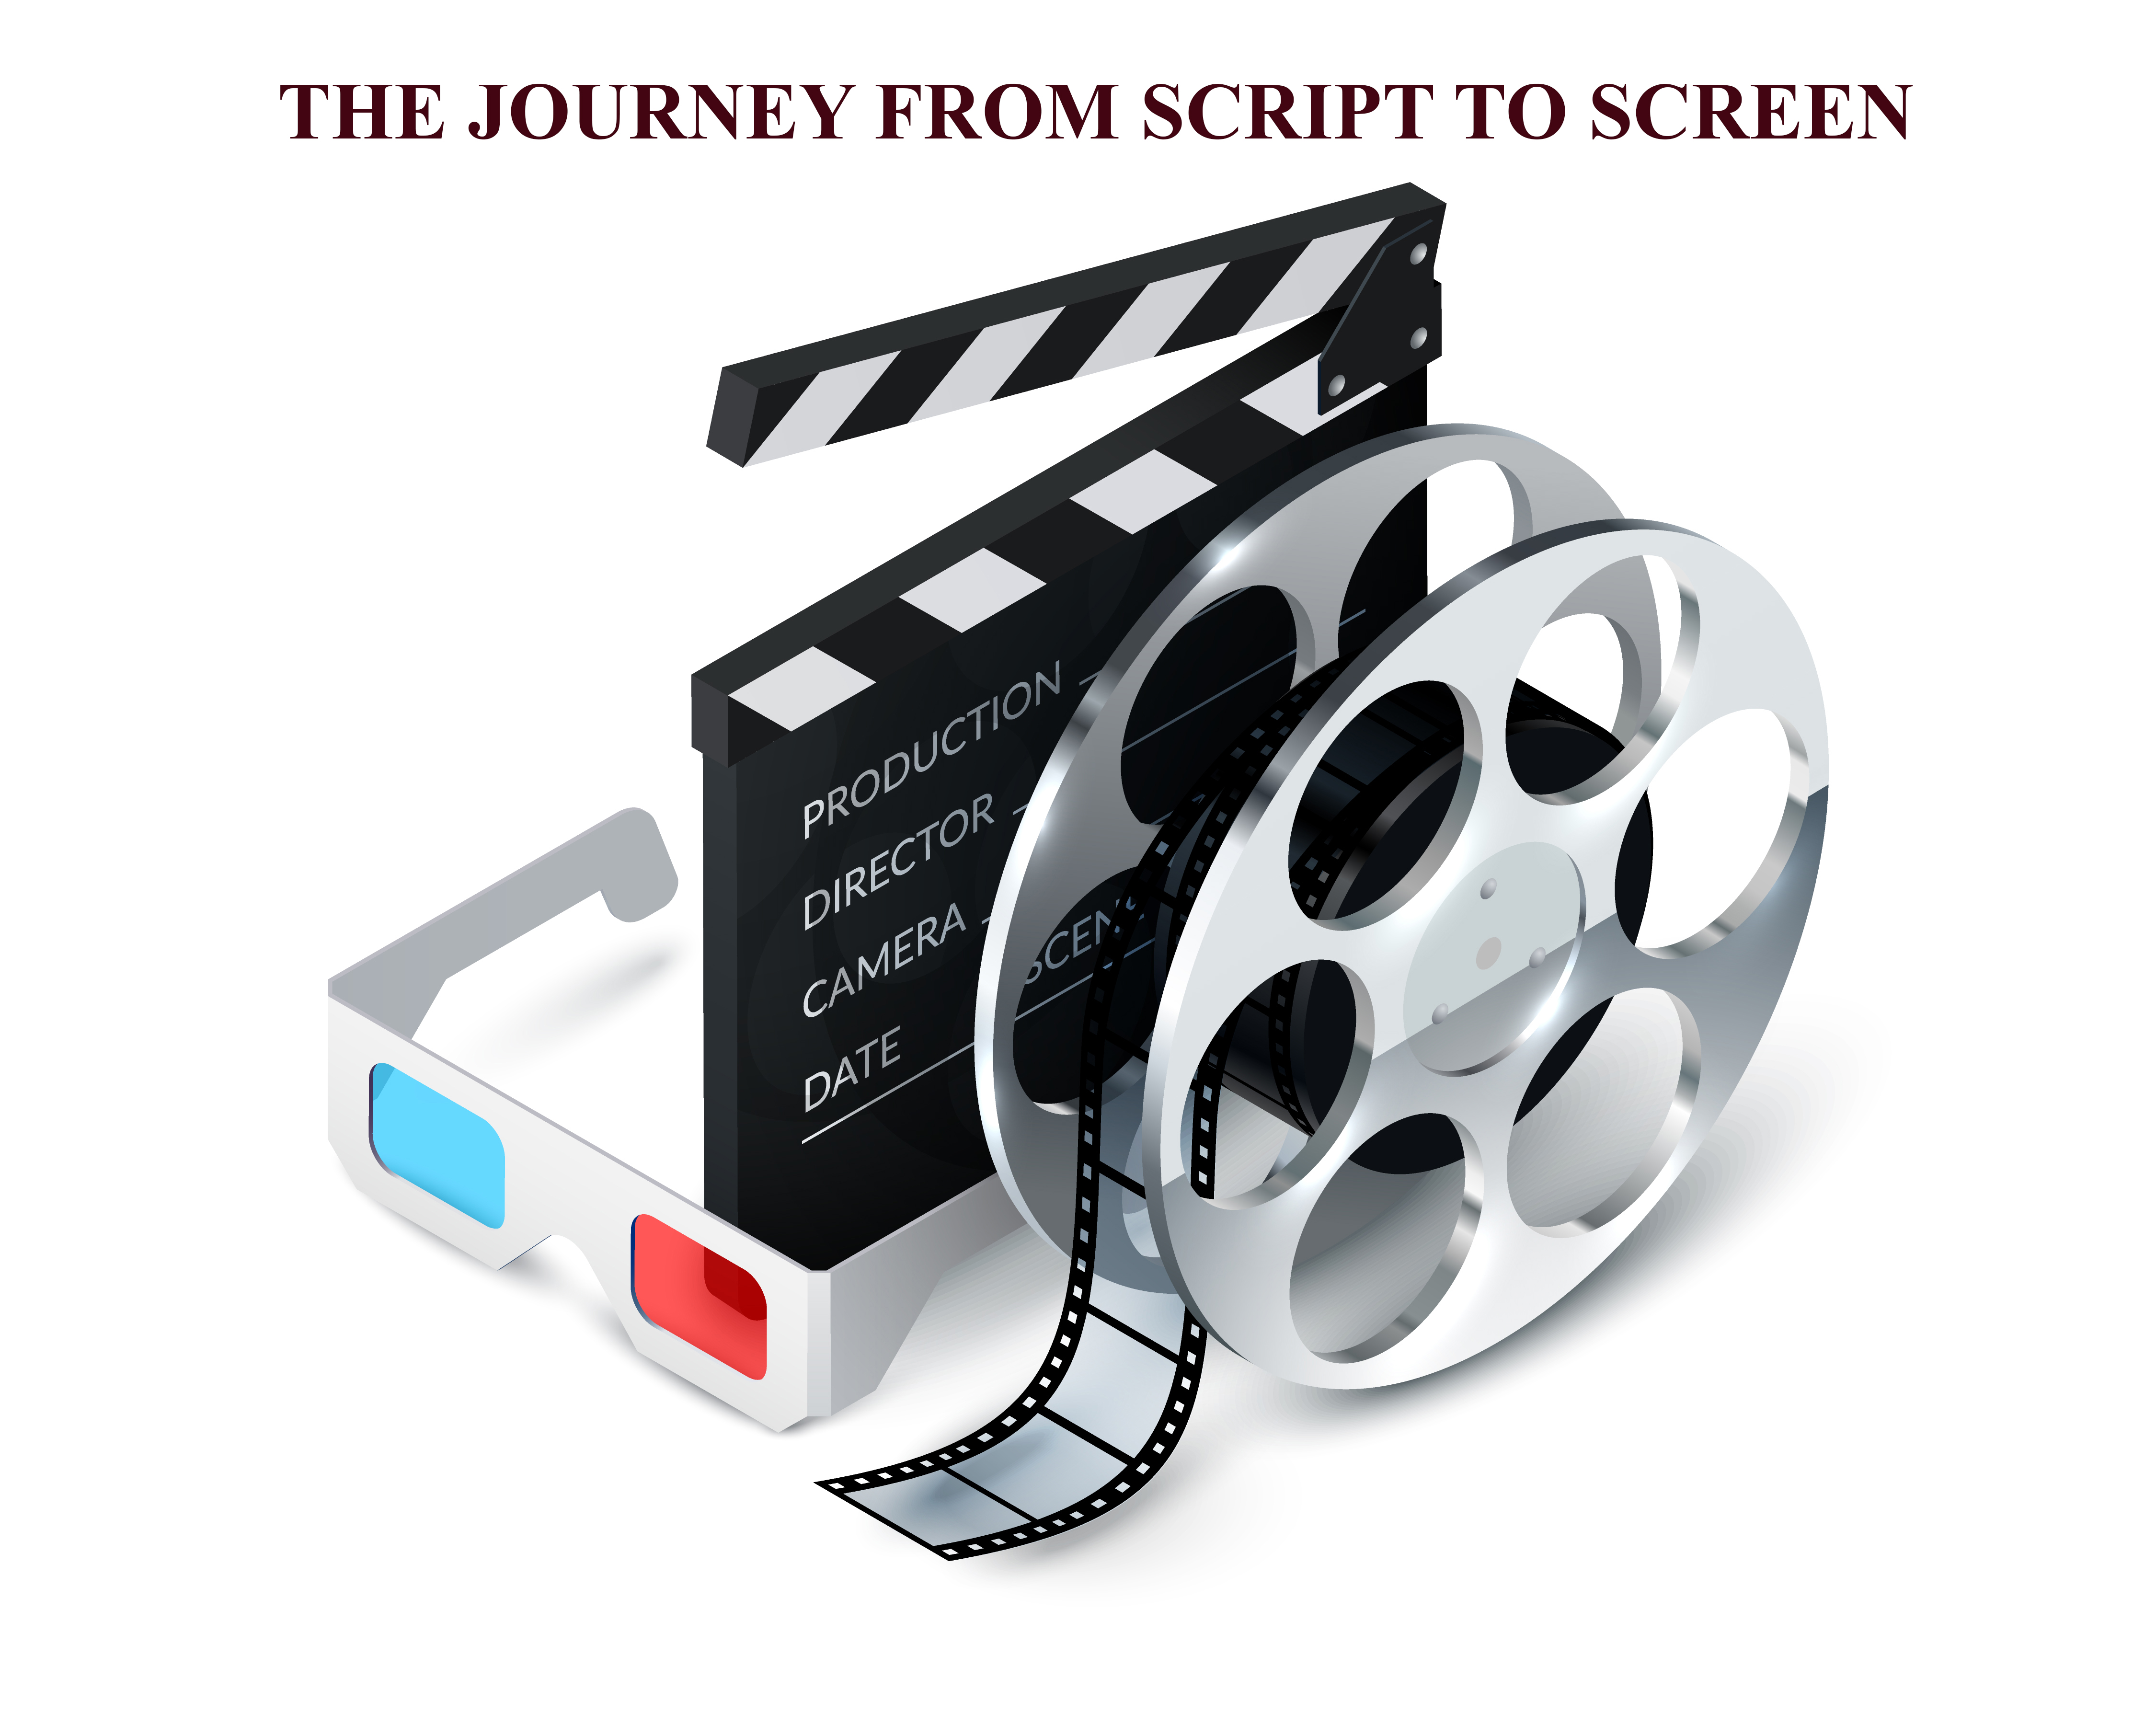 Tips for filmmakers' journey from script to screen